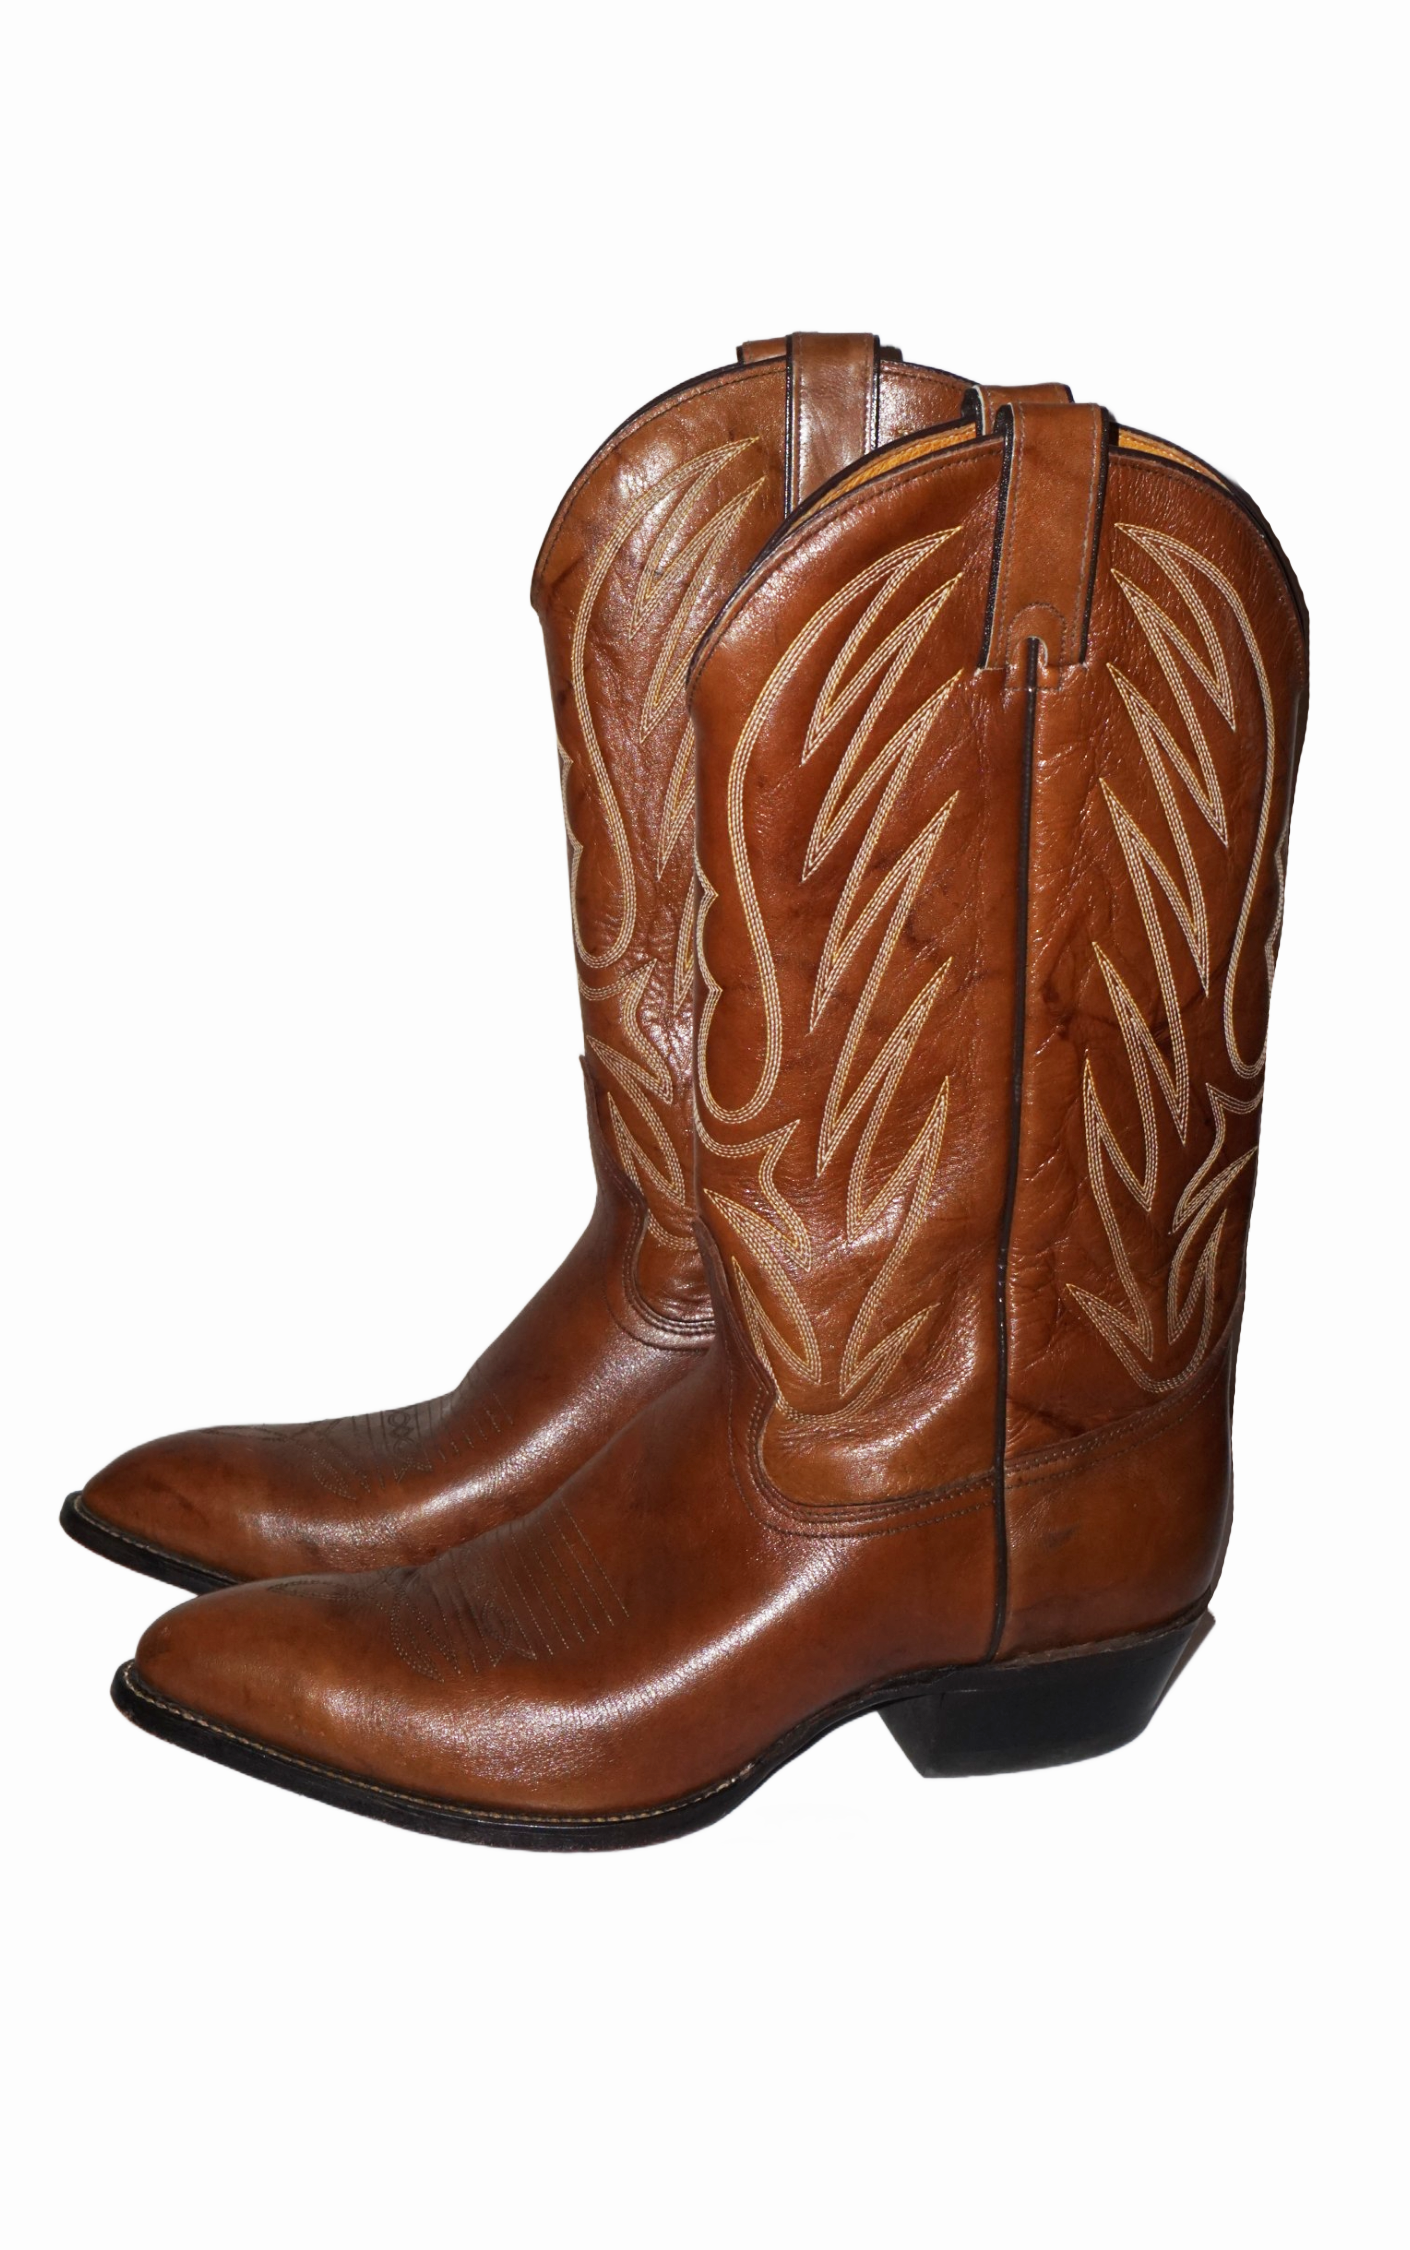 VINTAGE Imperial Brown Leather Western Cowboy Riding Boots  resellum